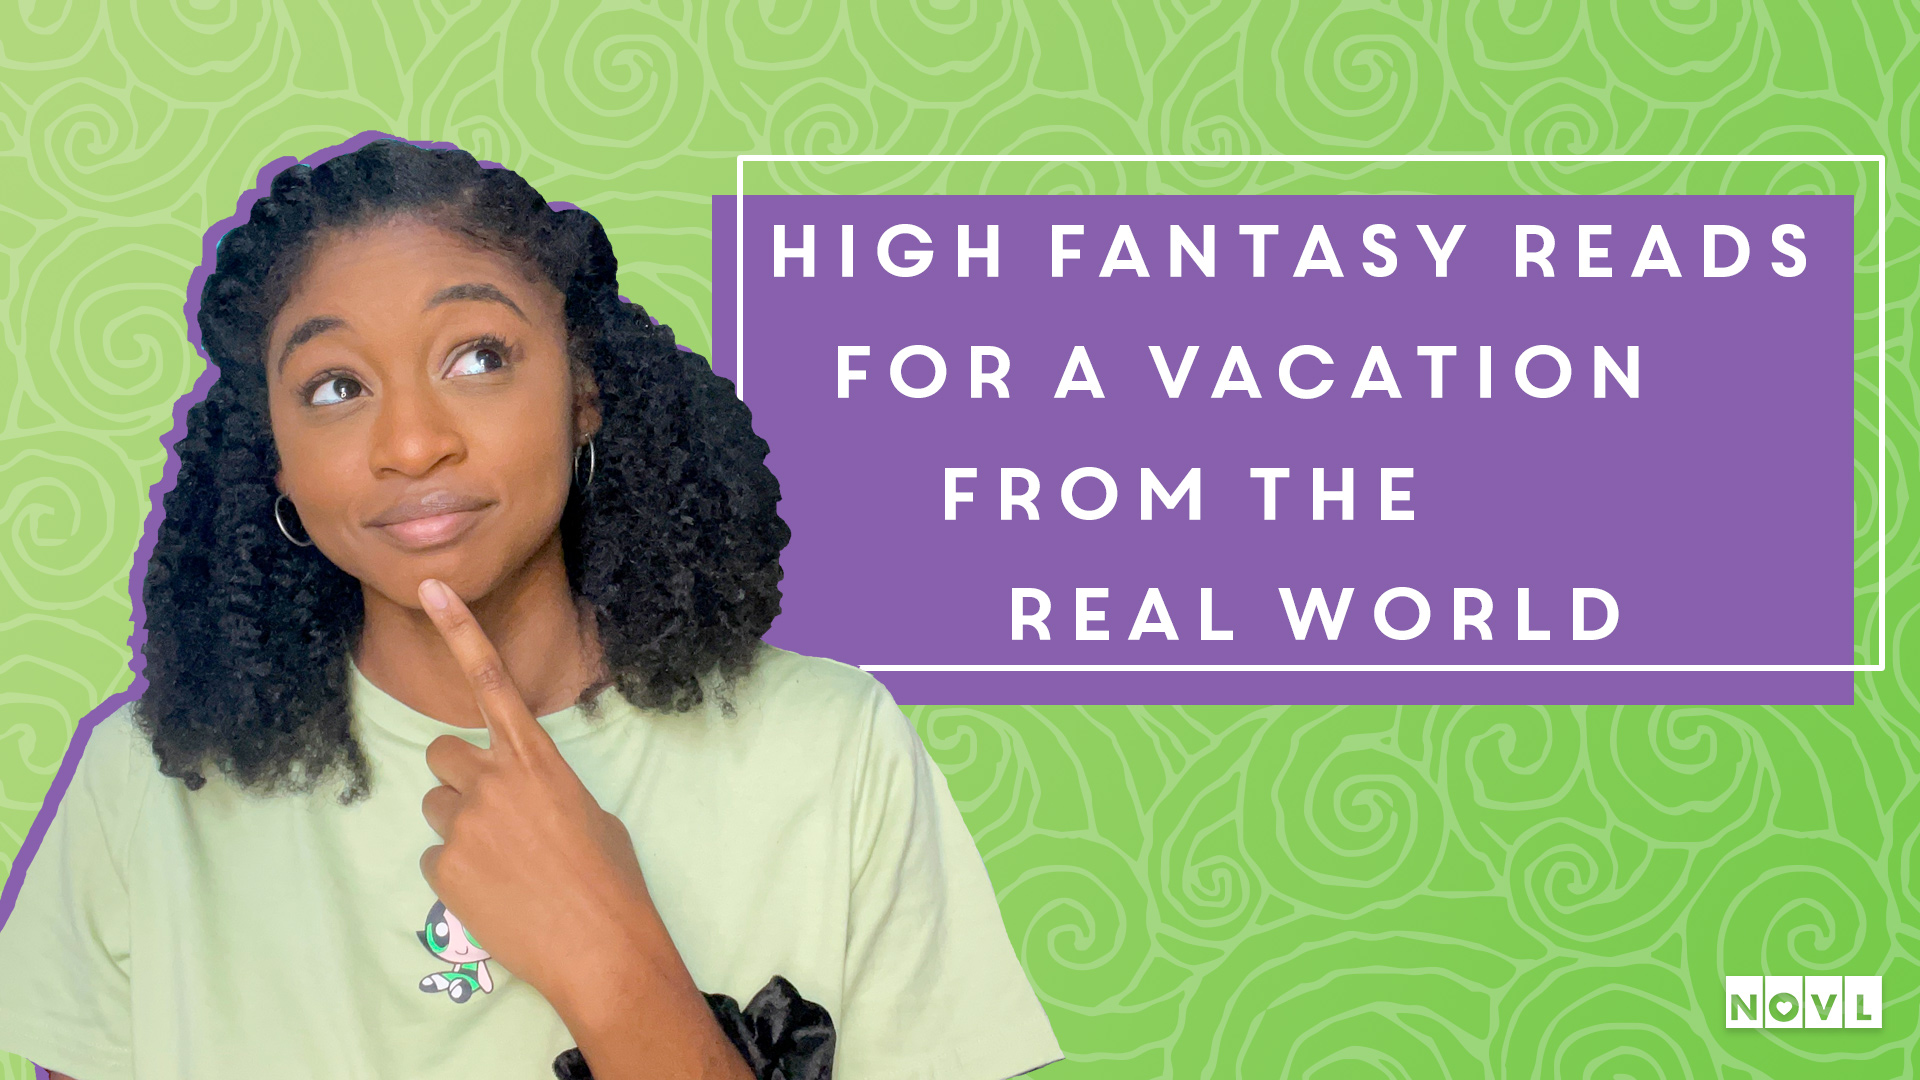 The NOVL Blog, Featured Image for Article: High Fantasy Reads for a Vacation from The Real World